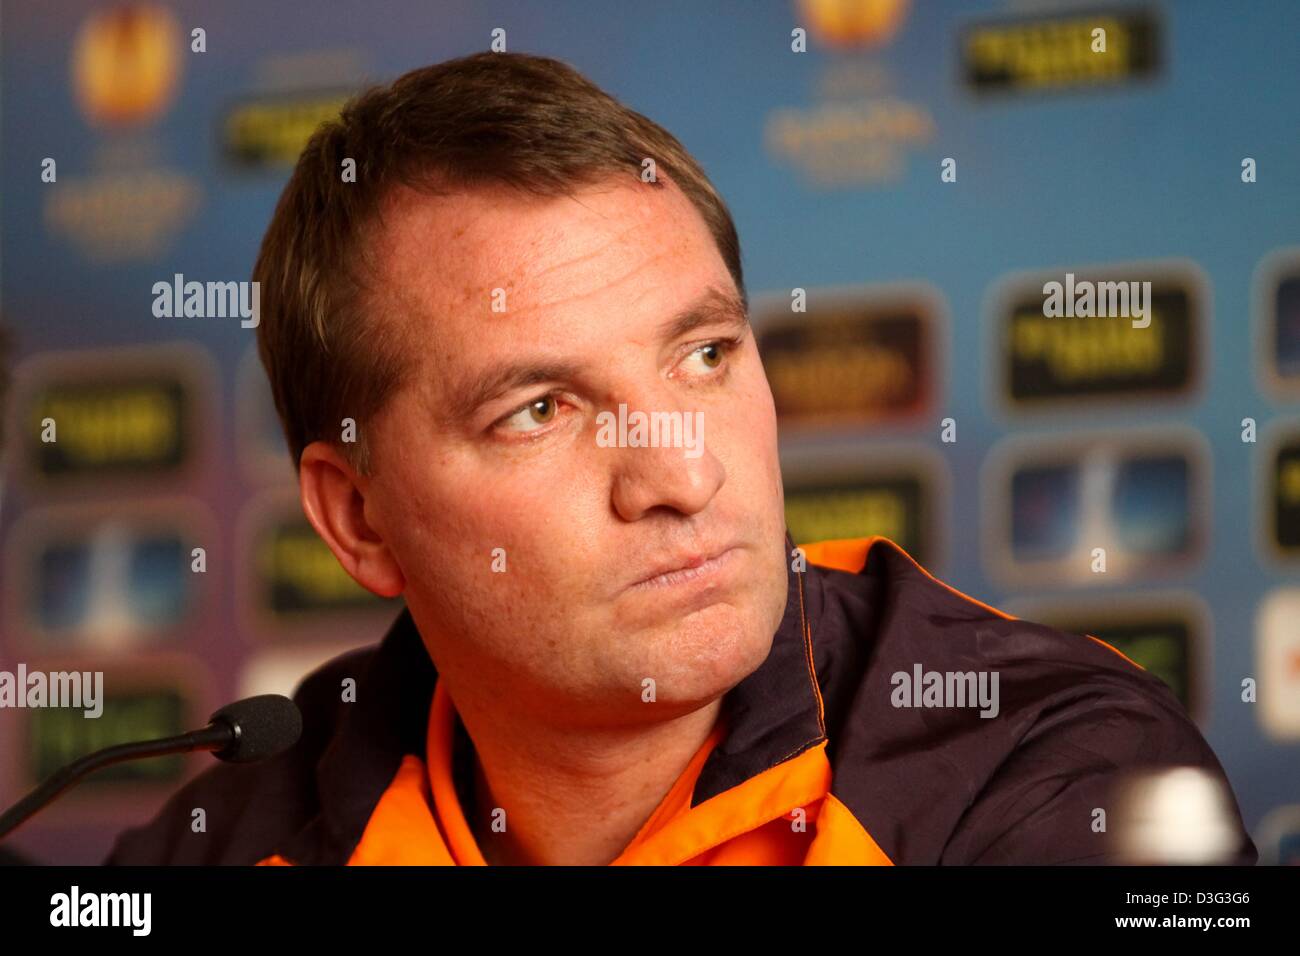 Feb. 13, 2013 - St. Petersburg, Russia - February 14,2013.St.Petersburg,Russia. UEFA Europa League. FC Zenit vs Liverpool FC. Pictured: Brendan Rodgers, manager of Premier League club Liverpool at the press conference in St.Petersburg. (Credit Image: © Trend/PhotoXpress/ZUMAPRESS.com) Stock Photo